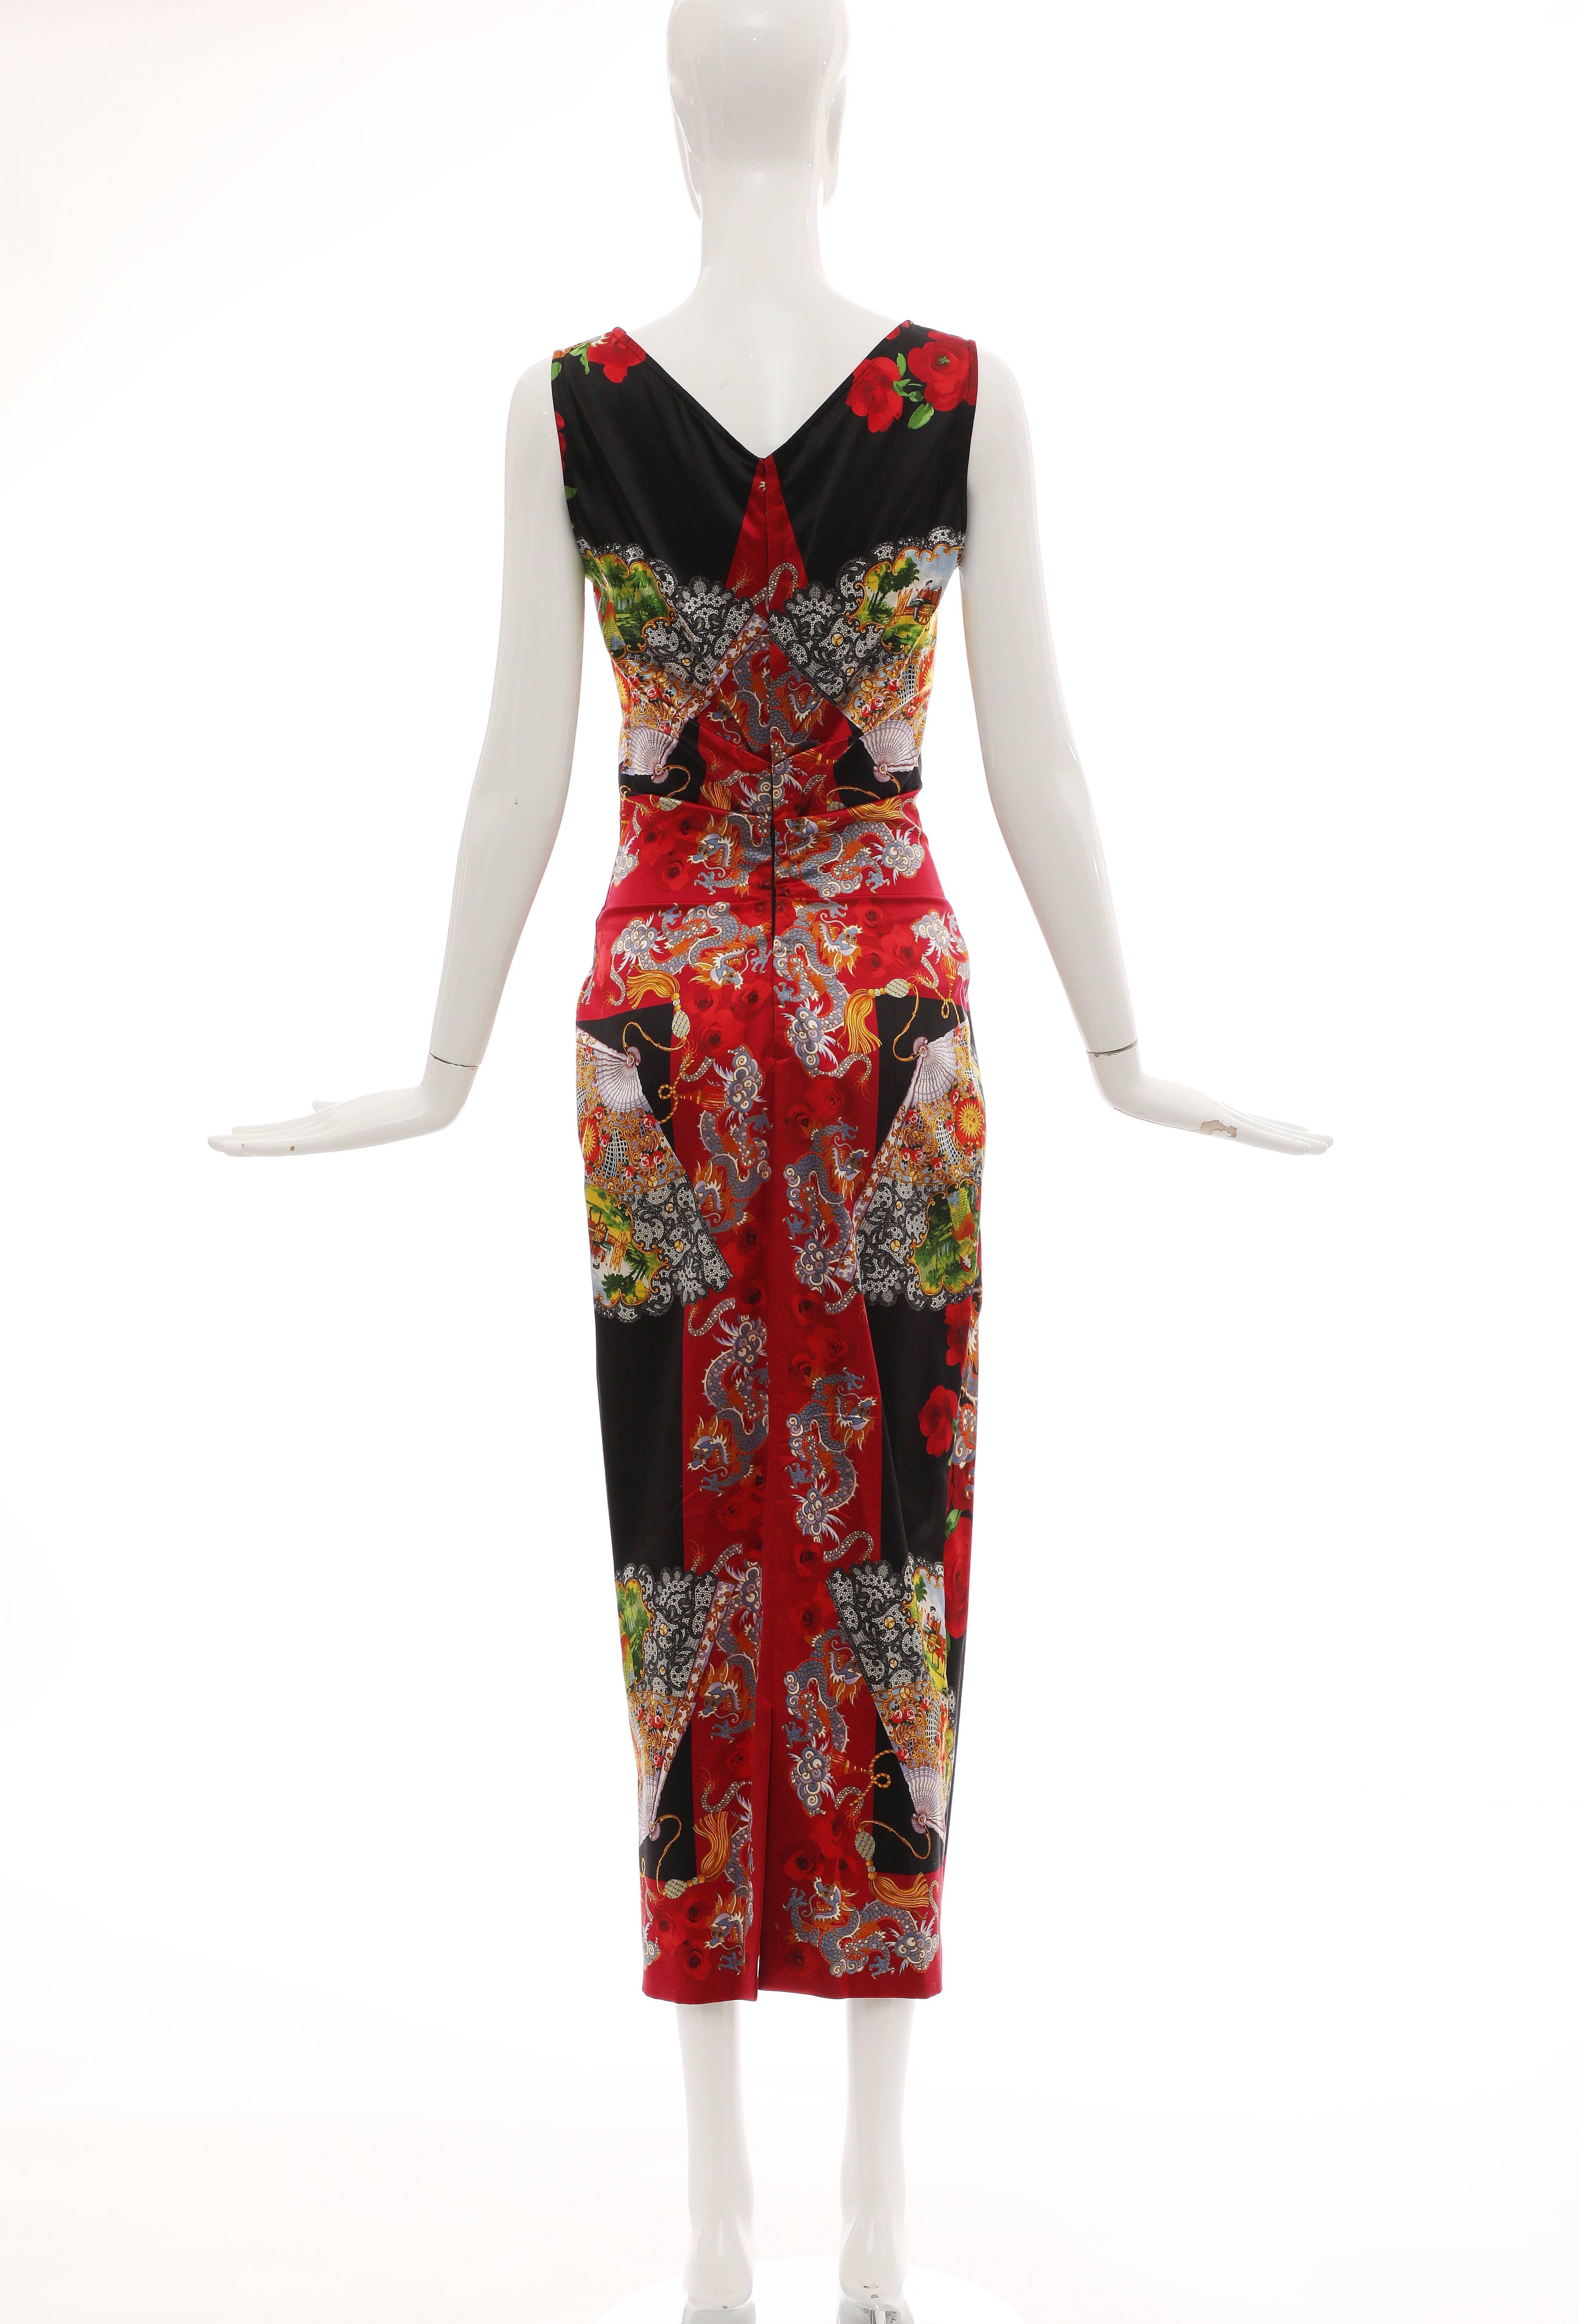 Dolce and Gabbana, Circa 1999, printed dragon and fan stretch silk satin evening dress with V-neck and hook-and-eye closures at back.
The dress is part of FIT Museum collection.

Bust 33, Waist 27, Hips 35, Length 53

IT. 42
US. 6

56% silk, 38%